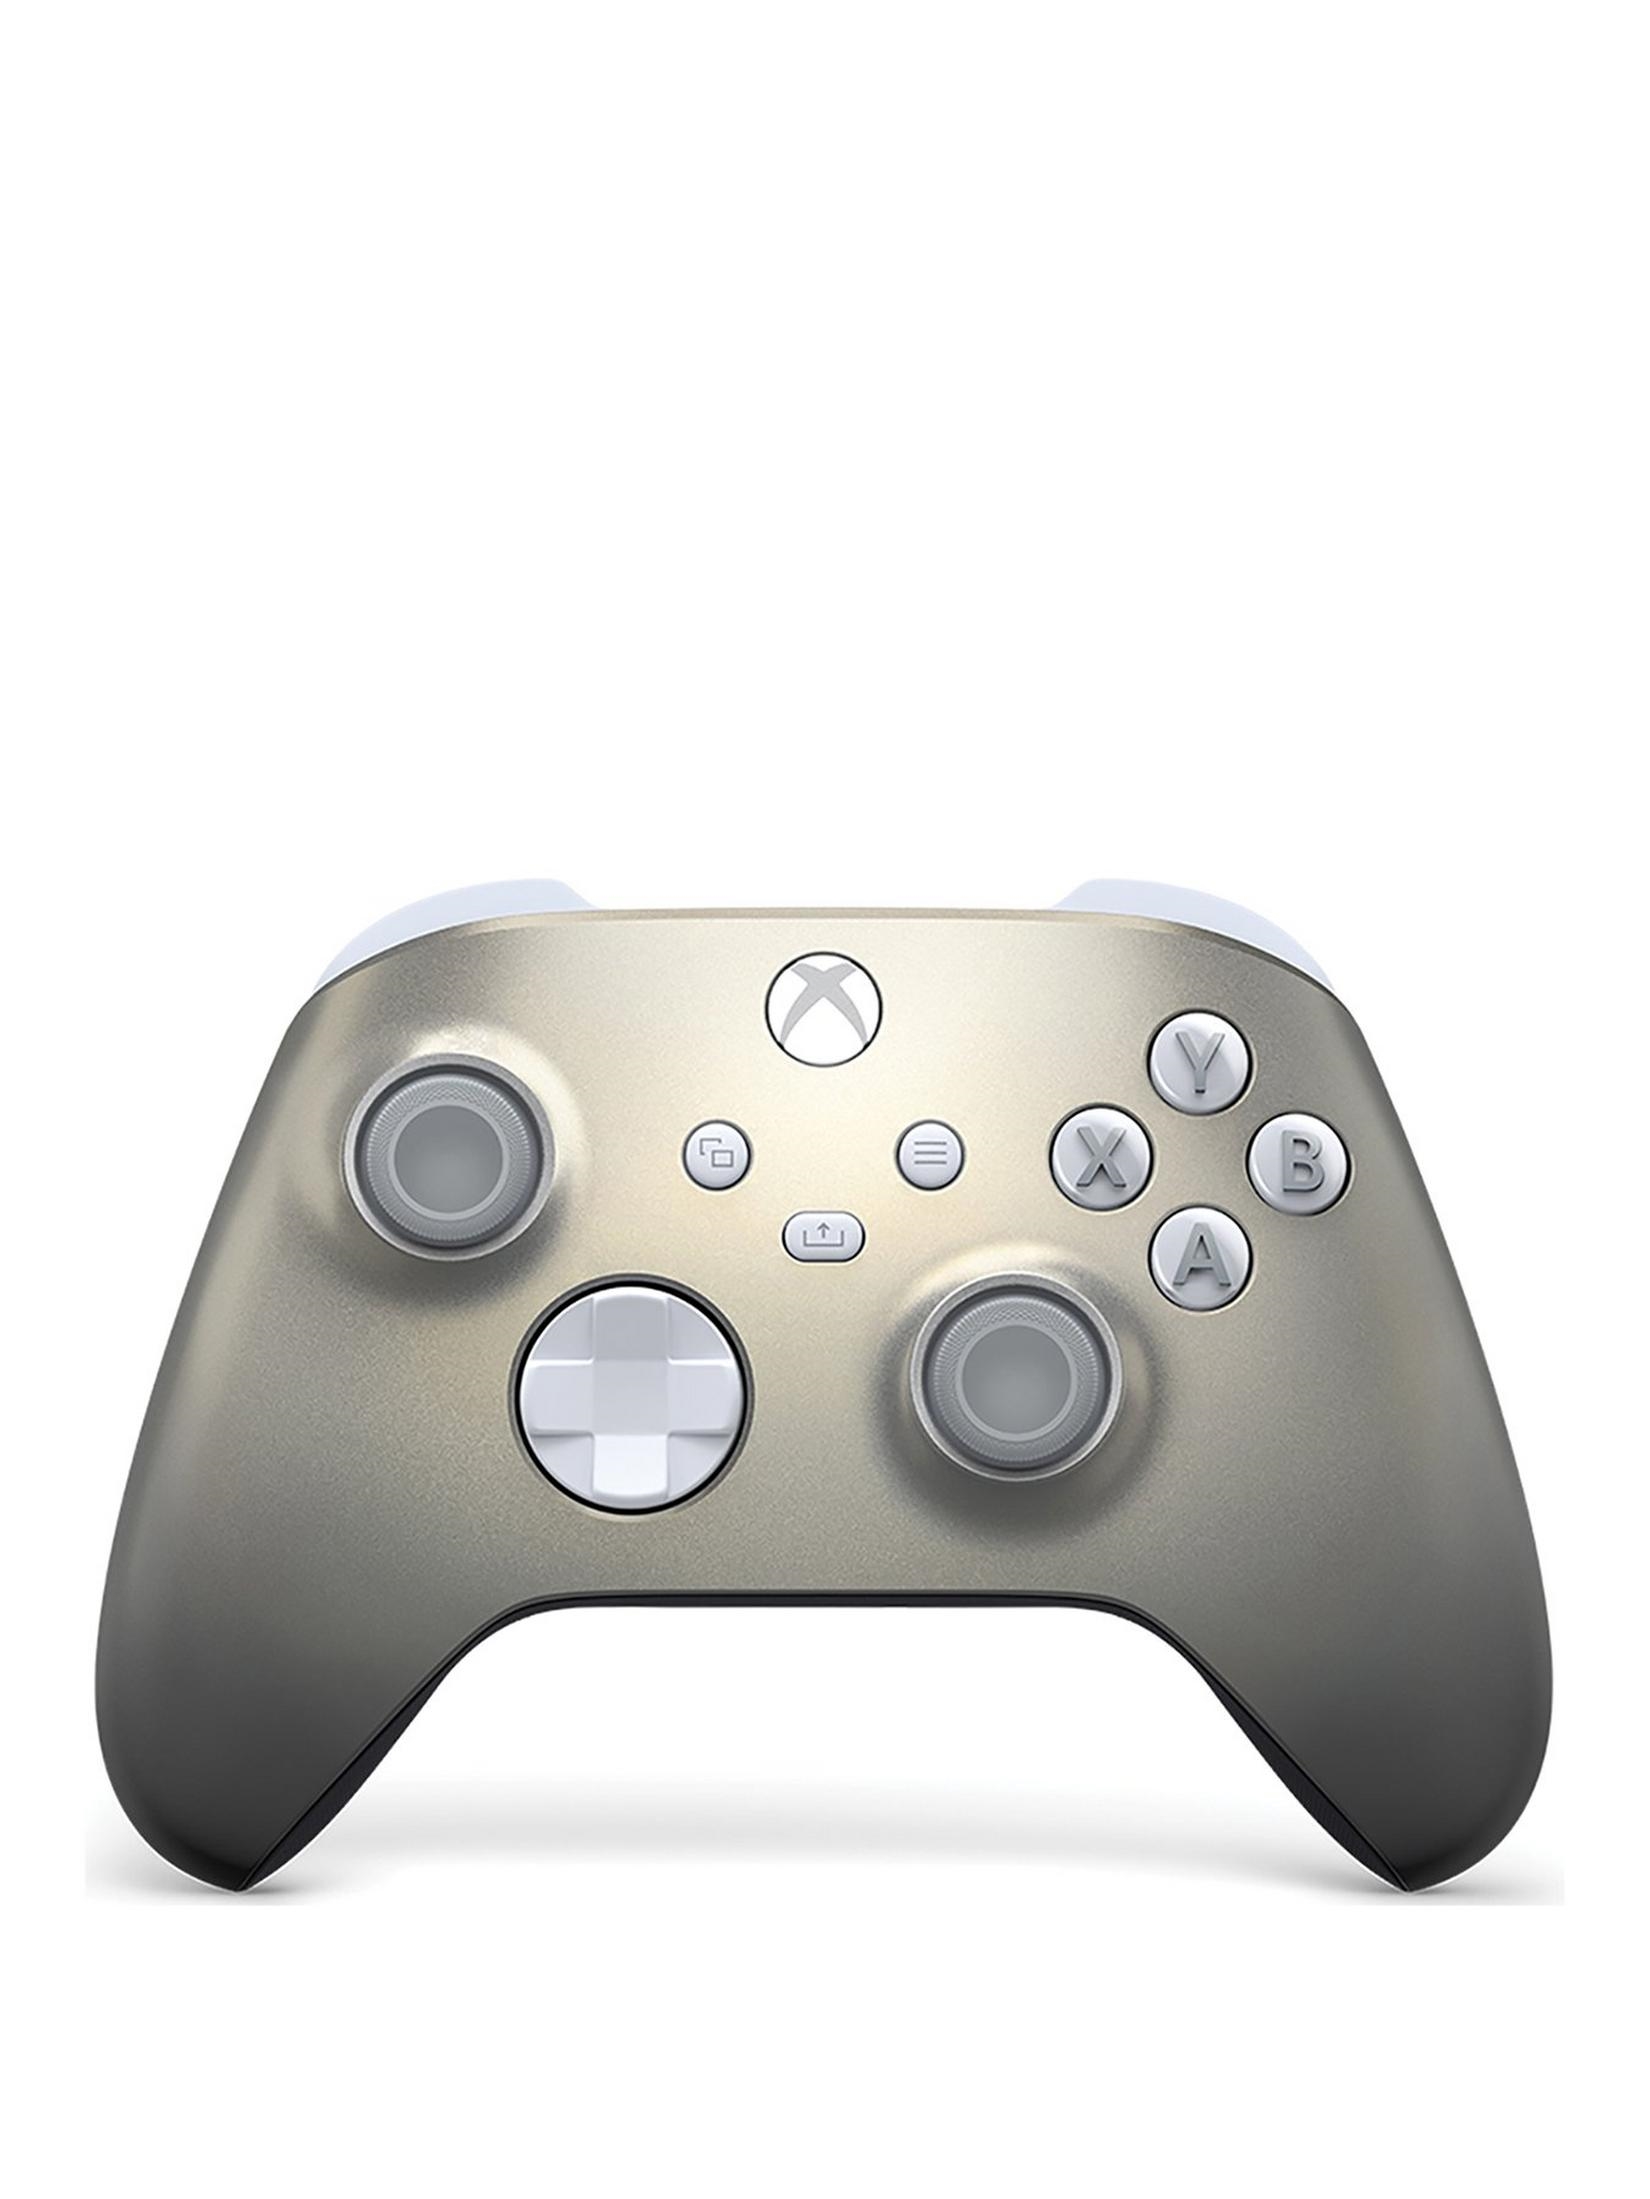 One Special Edition Lunar Shift Wireless Controller